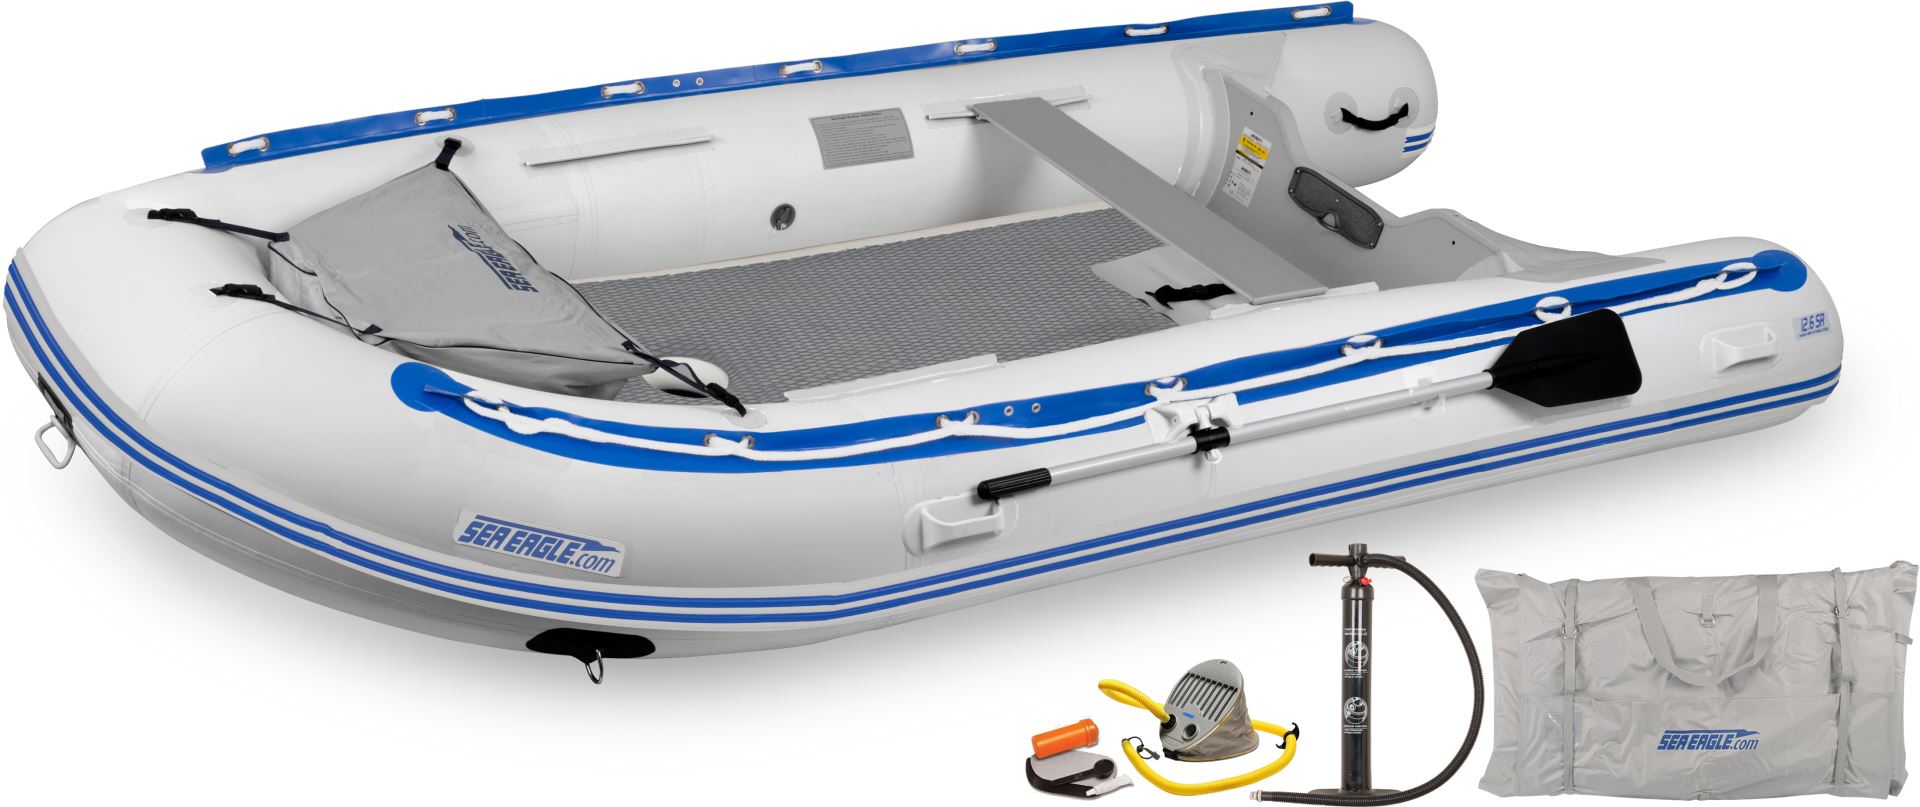 Sea Eagle 12'6" Sport Runabout Inflatable Boat Drop Stitch Deluxe Package - Sunzout Outdoor Spaces LLC